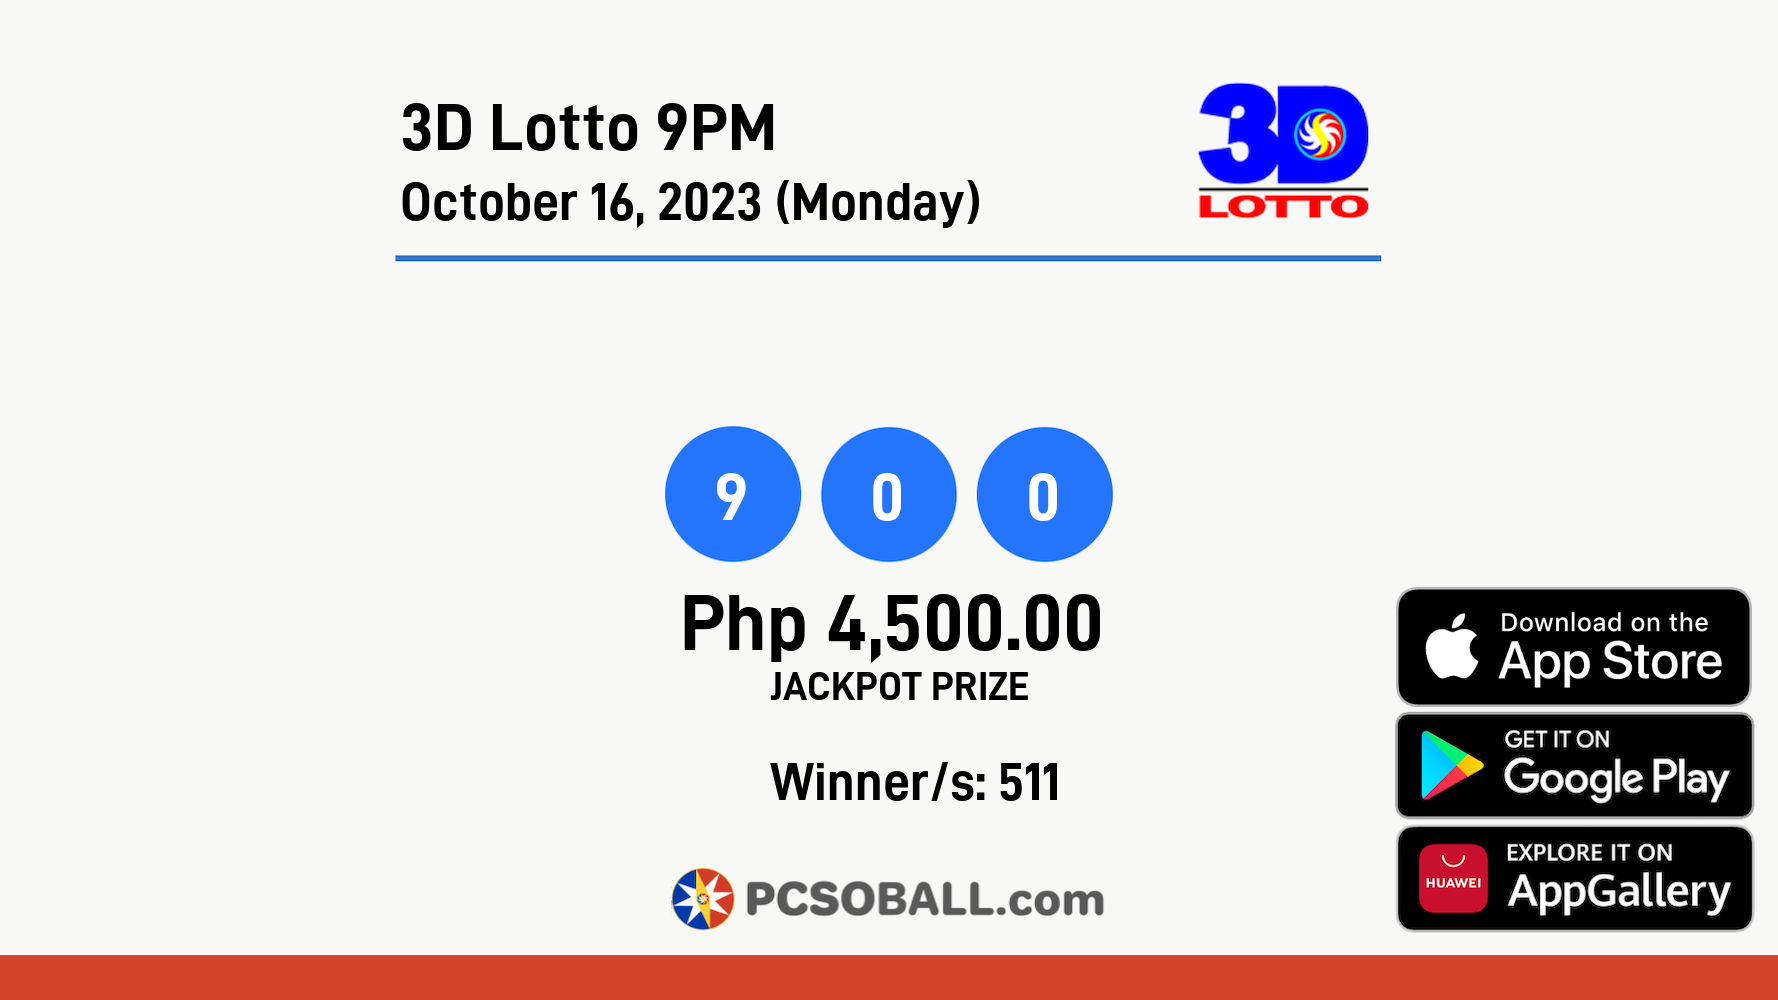 3D Lotto 9PM October 16, 2023 (Monday) Result